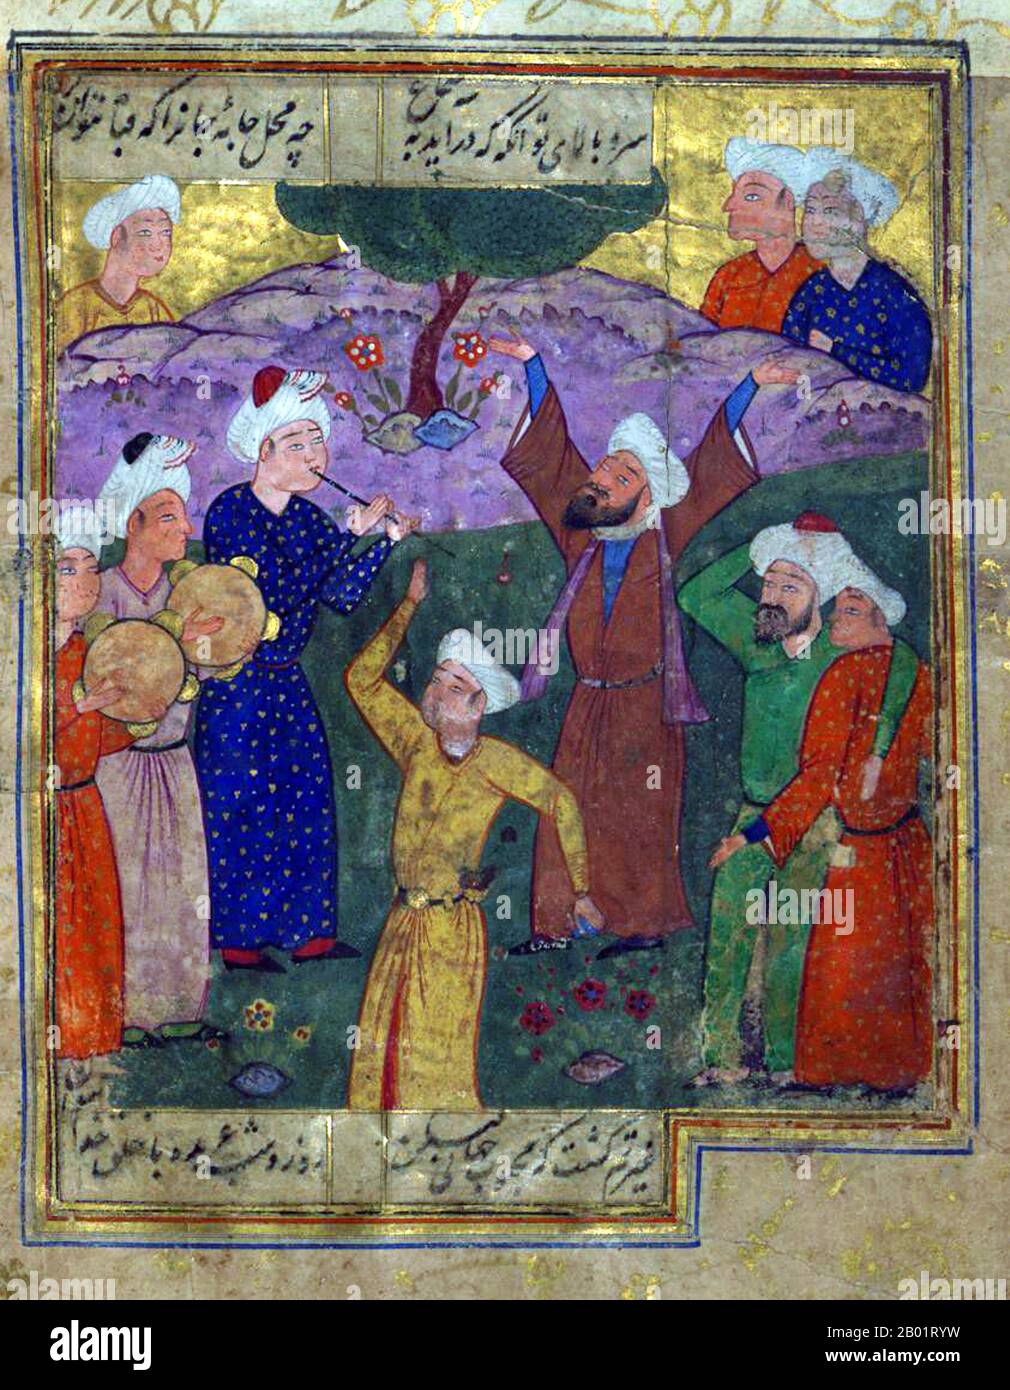 Iran/Persia: Sufis dancing to music. Folio from a divan of Hafez Shirazi (c. 1325-1390), 16th century.  Khwāja Shamsu d-Dīn Muhammad Hāfez-e Shīrāzī, known by his pen name Hāfez, was a Persian lyric poet. His collected works composed of series of Persian poetry (Divan) are to be found in the homes of most Persian speakers in Iran and Afghanistan, as well as elsewhere in the world, who learn his poems by heart and use them as proverbs and sayings to this day. His life and poems have been the subject of much analysis, commentary and interpretation. Stock Photo